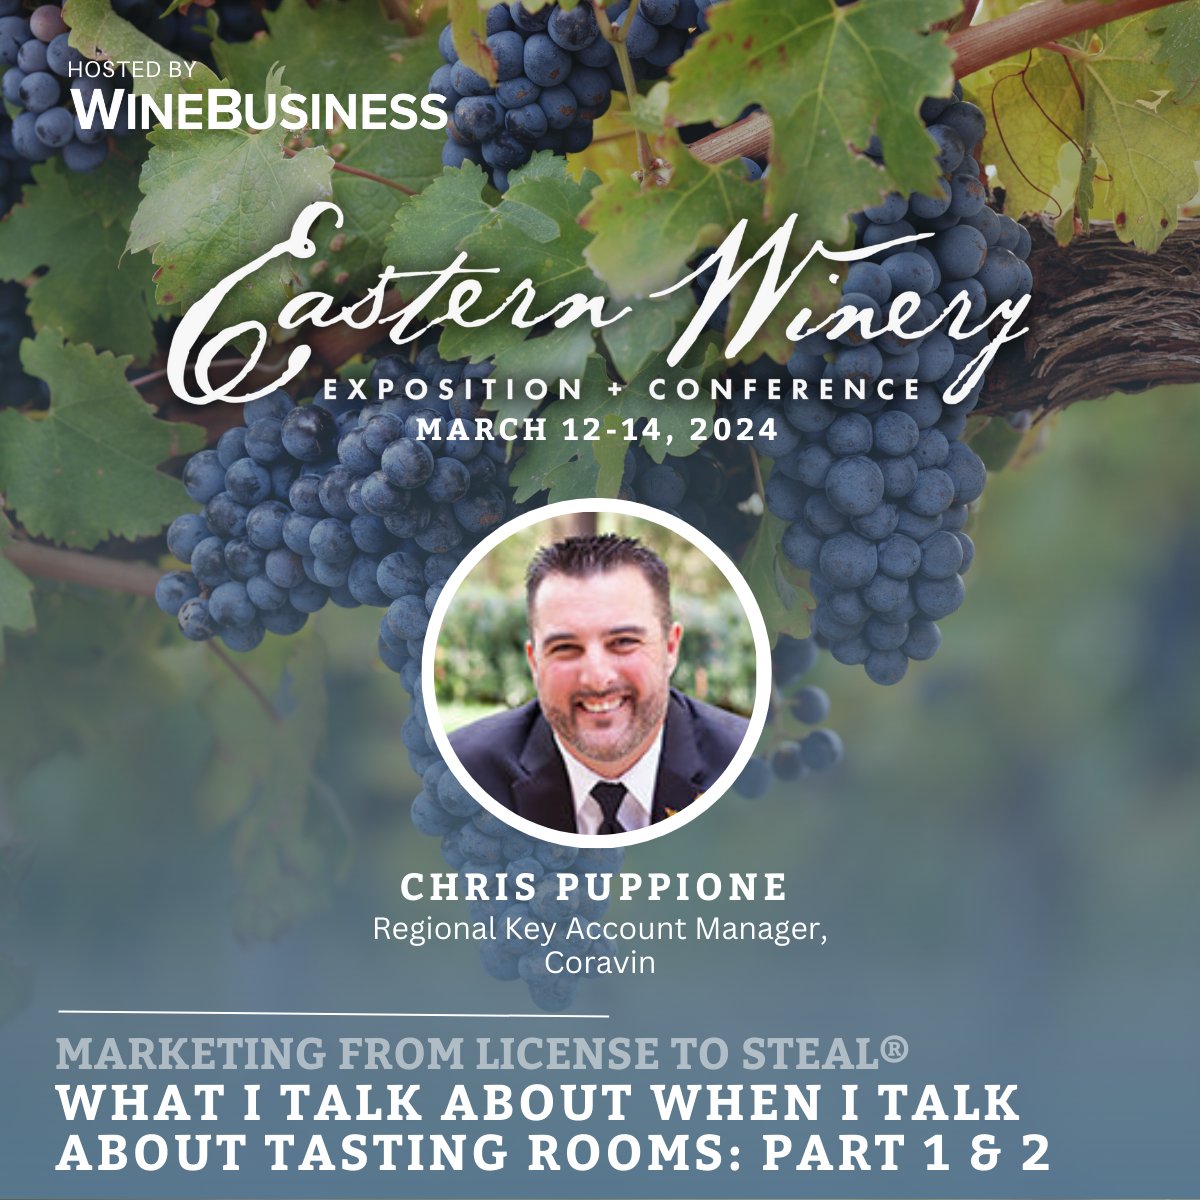 Learn how to master the arts of influence, rapport-building, and storytelling to fulfill your guests' needs and raise the bar for hospitality. Register for Eastern Winery Exposition + Conference #EWE and turn your customers into passionate advocates! ow.ly/SBtB50QAnXx